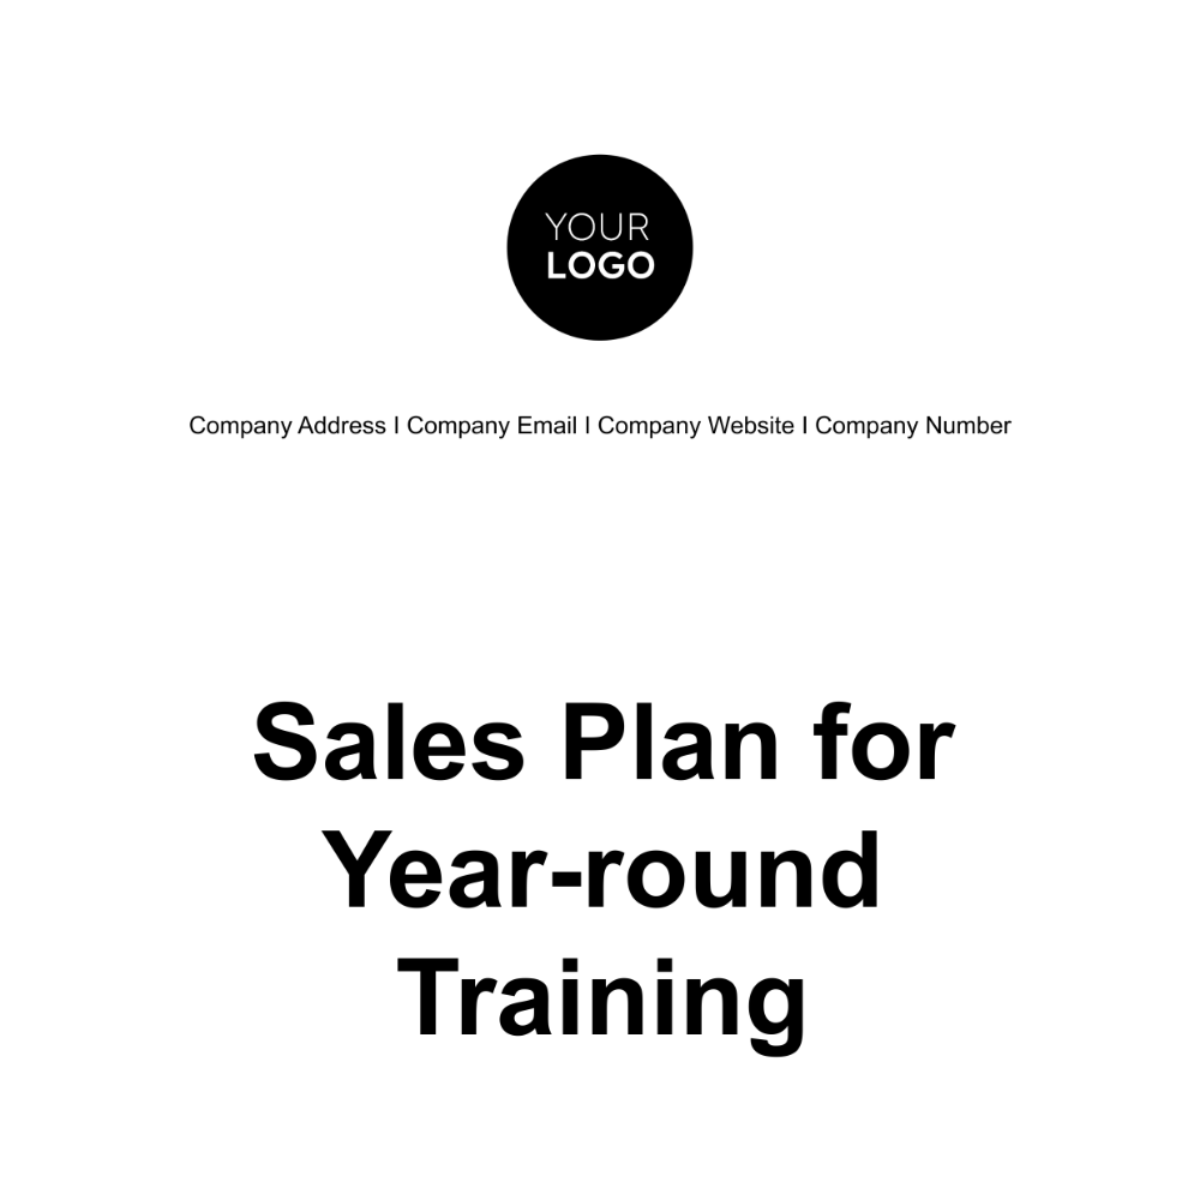 Free Sales Plan for Year-round Training Template